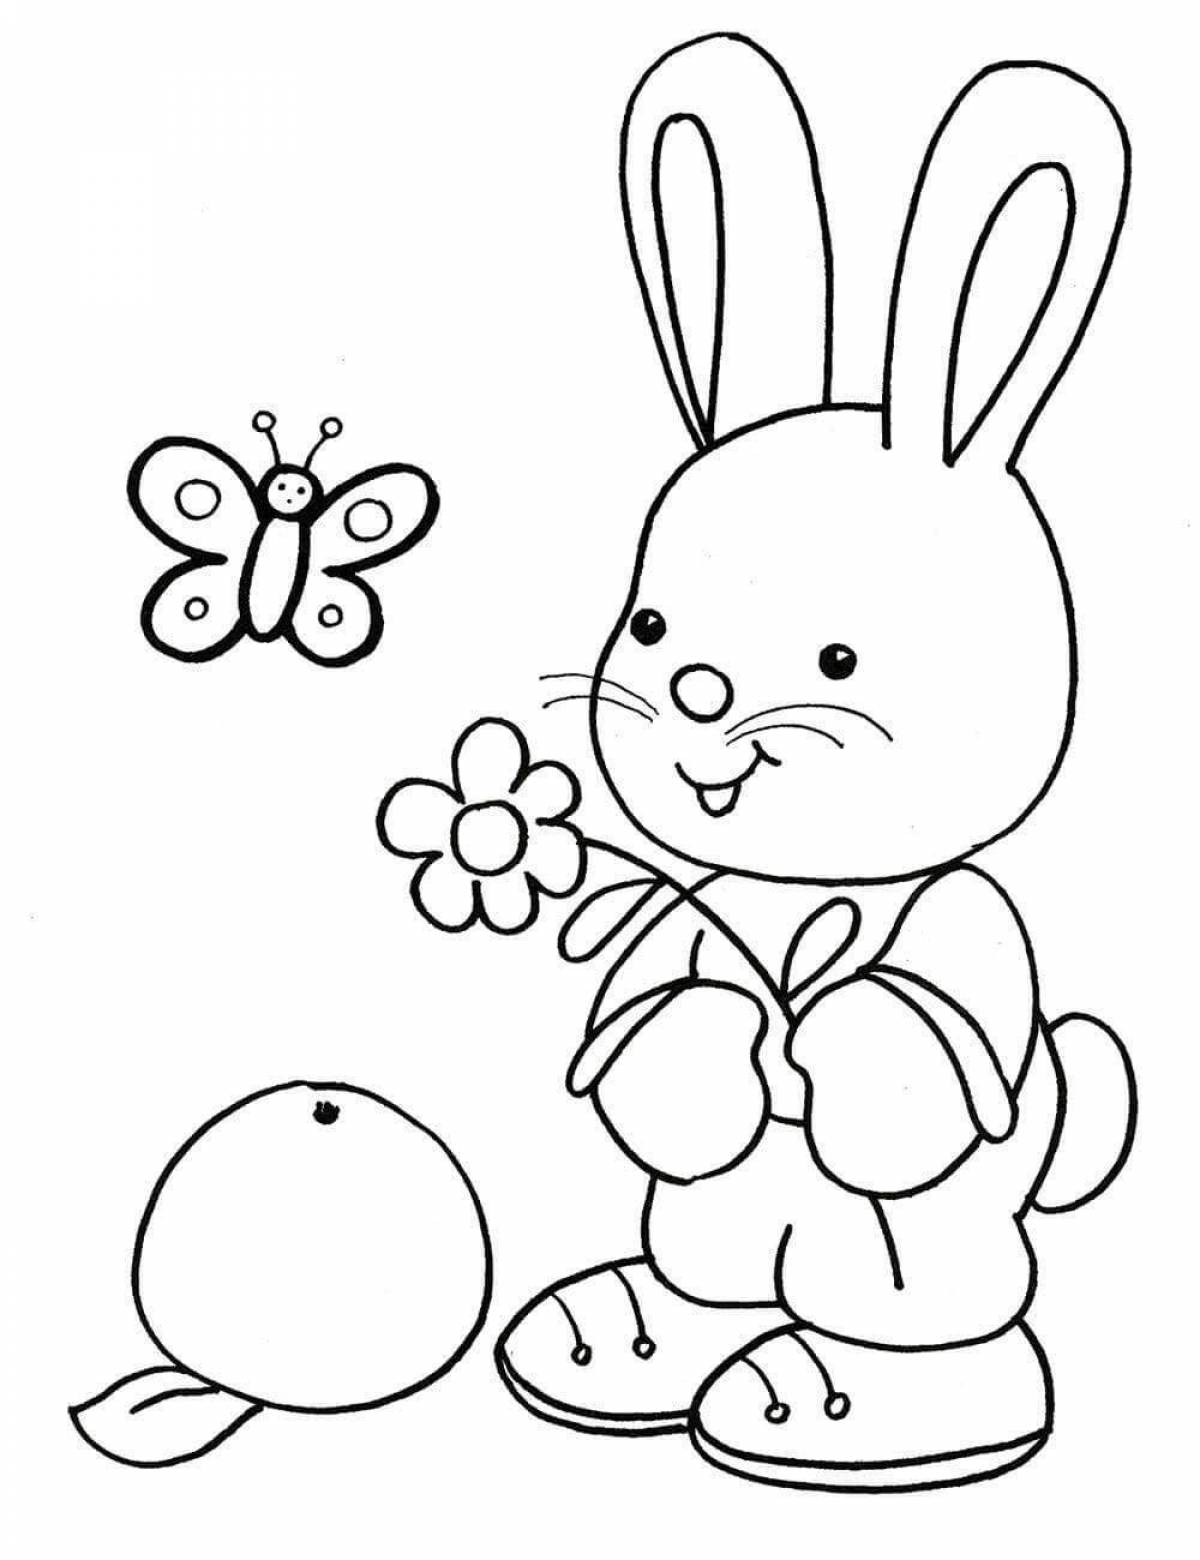 Color-frenzy coloring page for children 2-3 years old